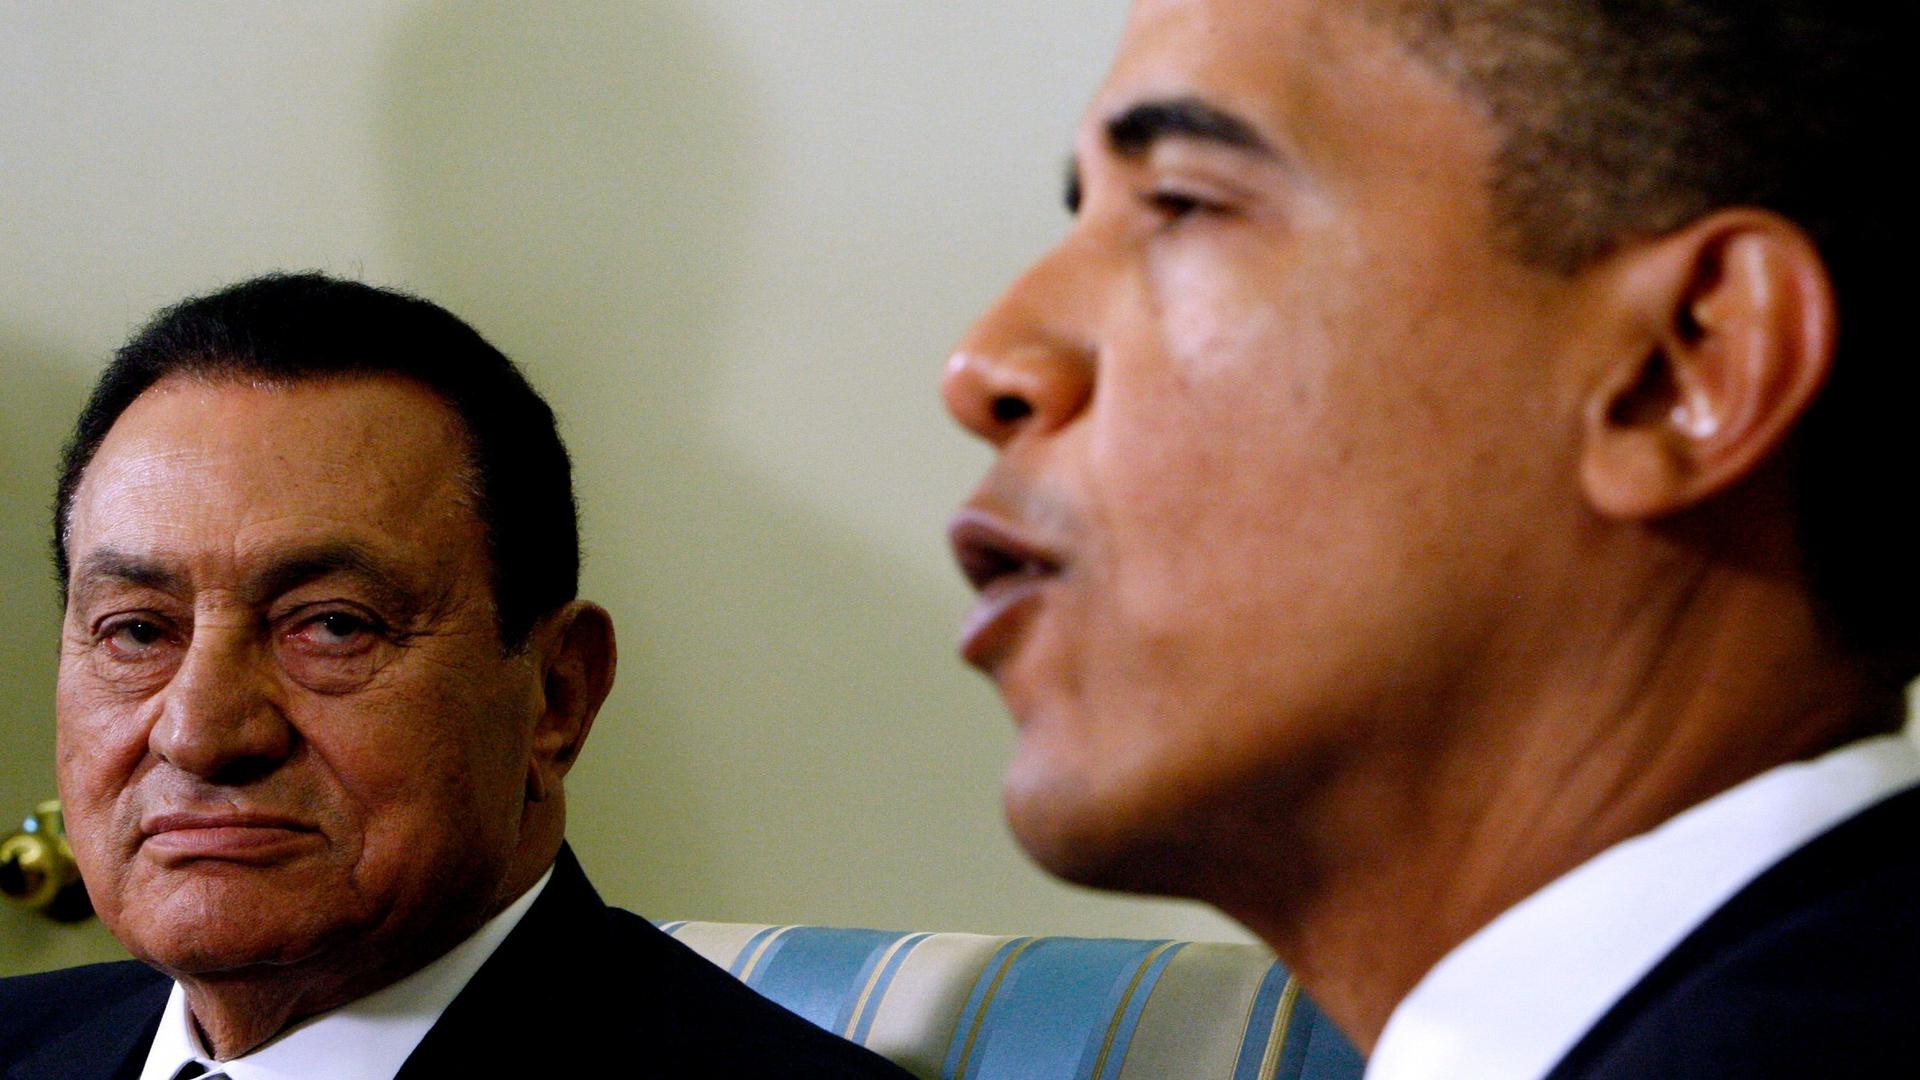 In this Aug. 18, 2009 file photo, US President Barack Obama meets with Egyptian President Hosni Mubarak, in the Oval Office of the White House in Washington.